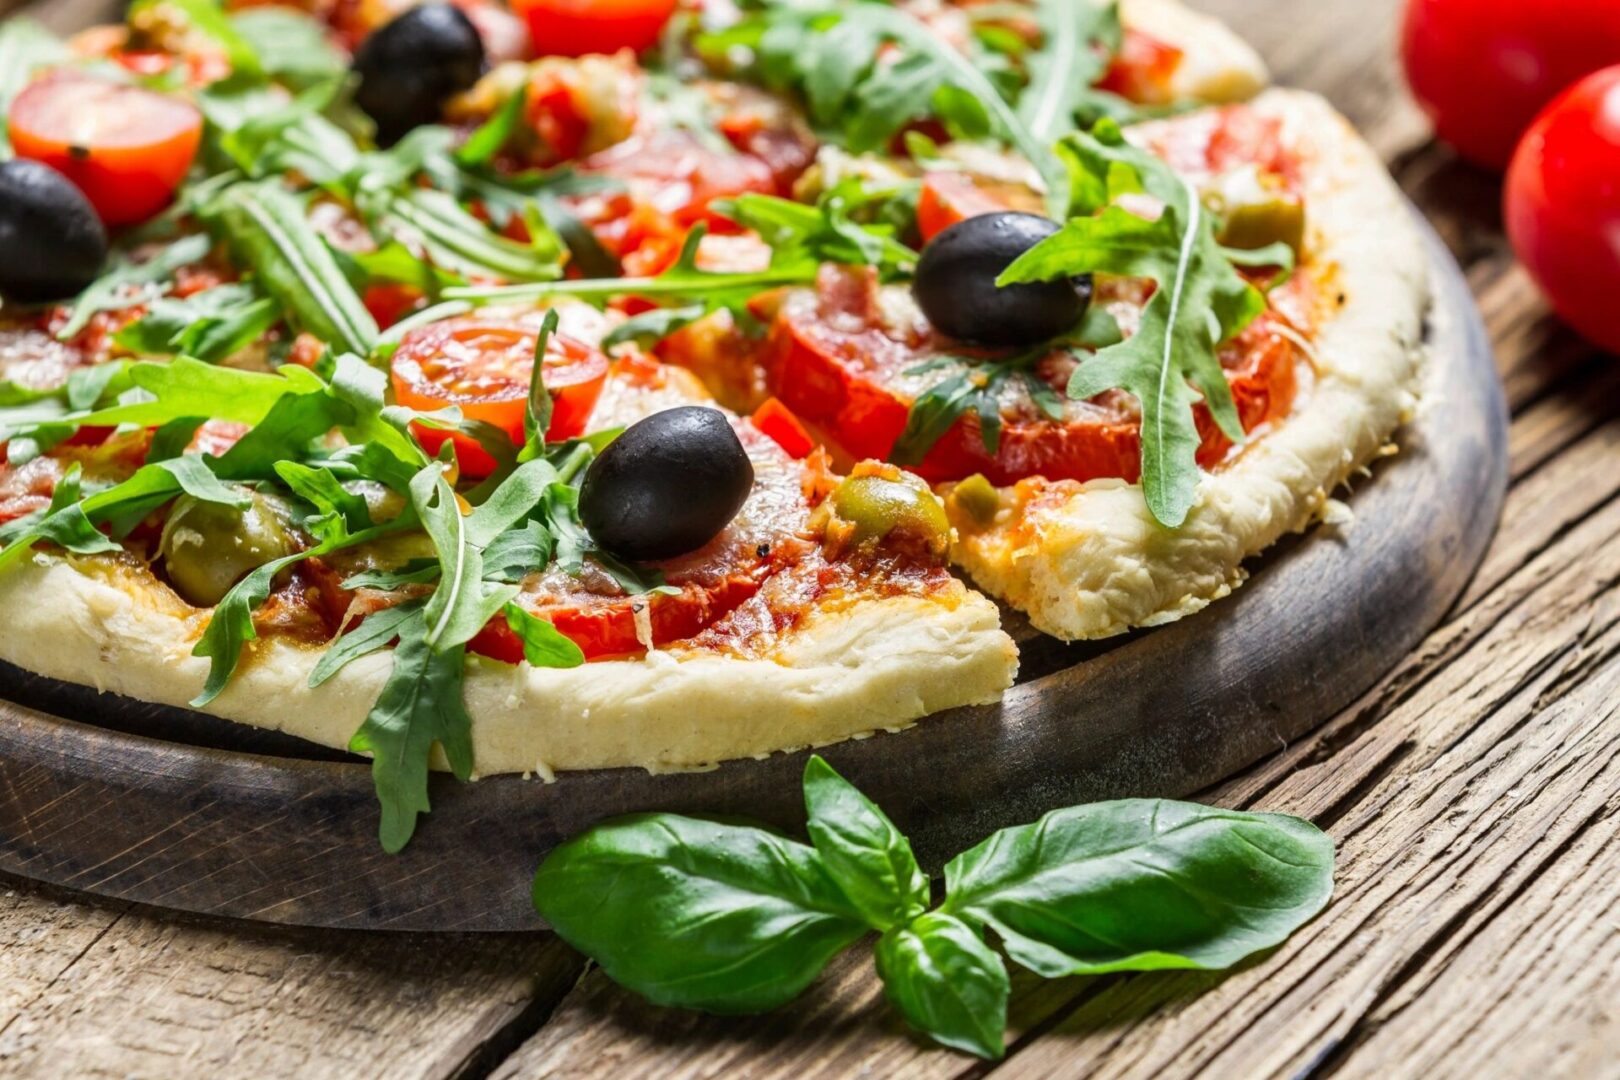 A pizza with olives and basil on top of it.